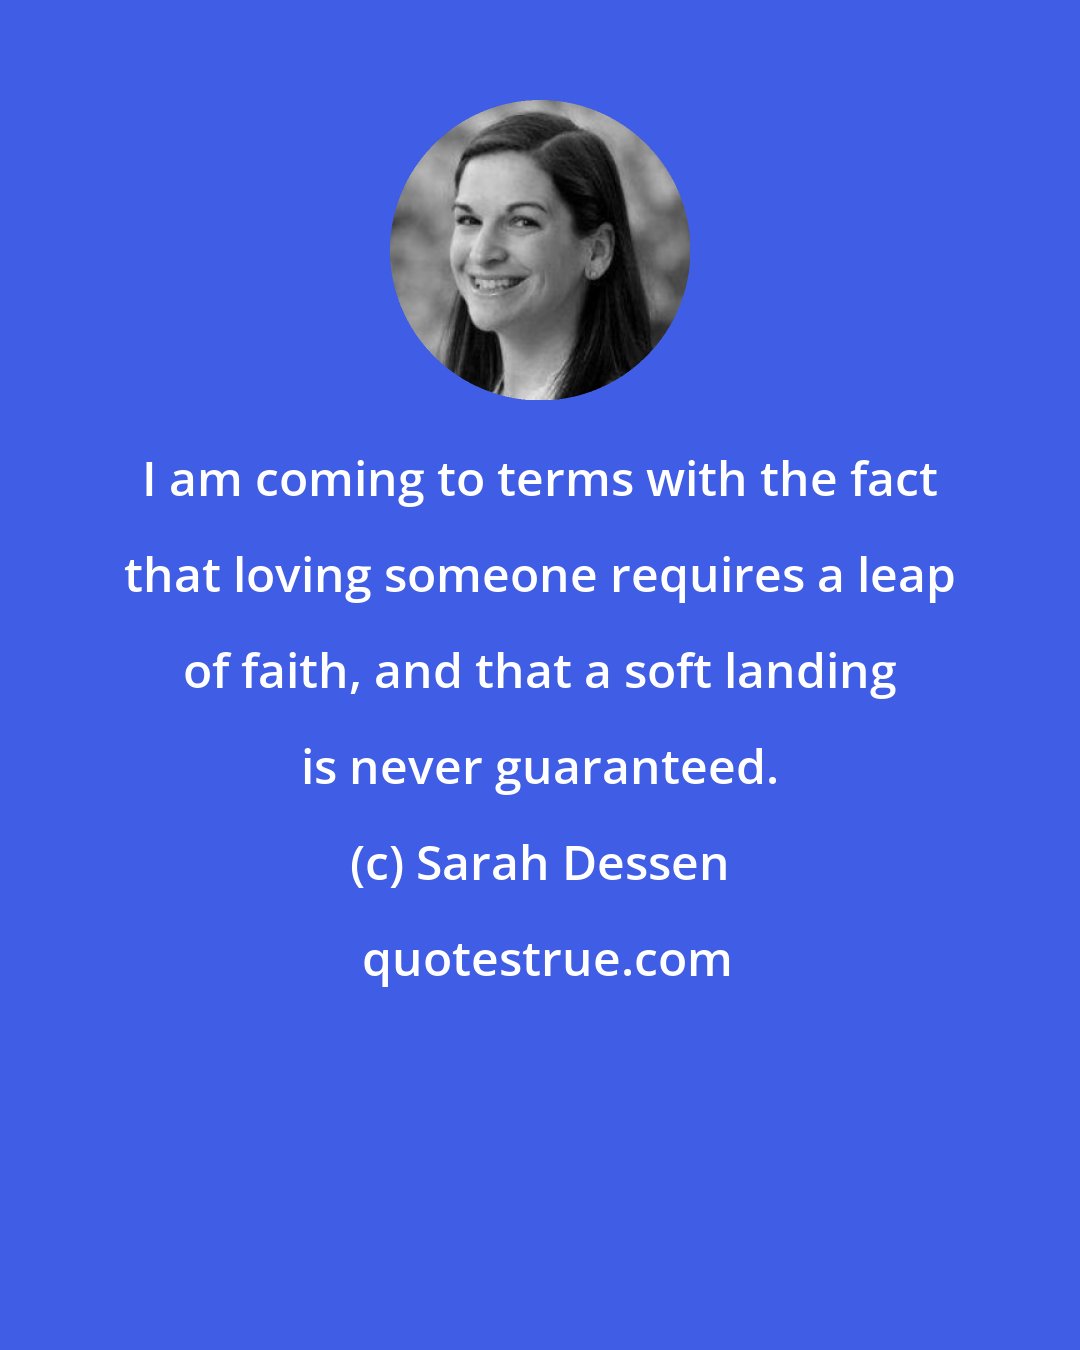 Sarah Dessen: I am coming to terms with the fact that loving someone requires a leap of faith, and that a soft landing is never guaranteed.